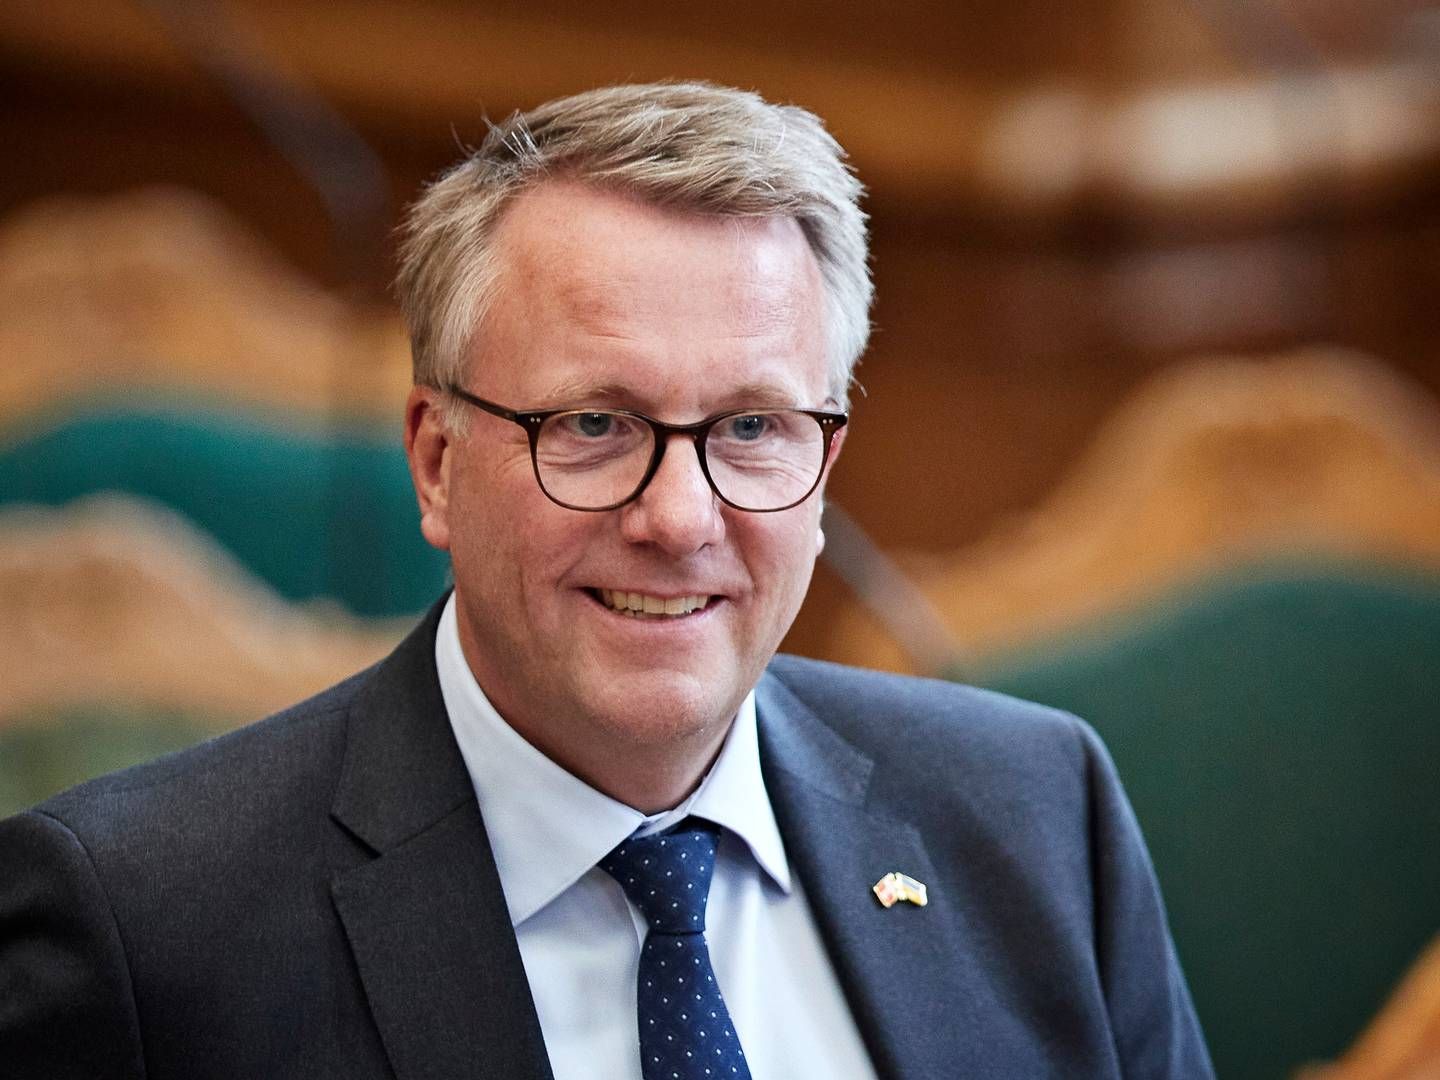 The Danish Minister for Industry, Business and Financial Affairs, Morten Bødskov. | Photo: Jens Dresling